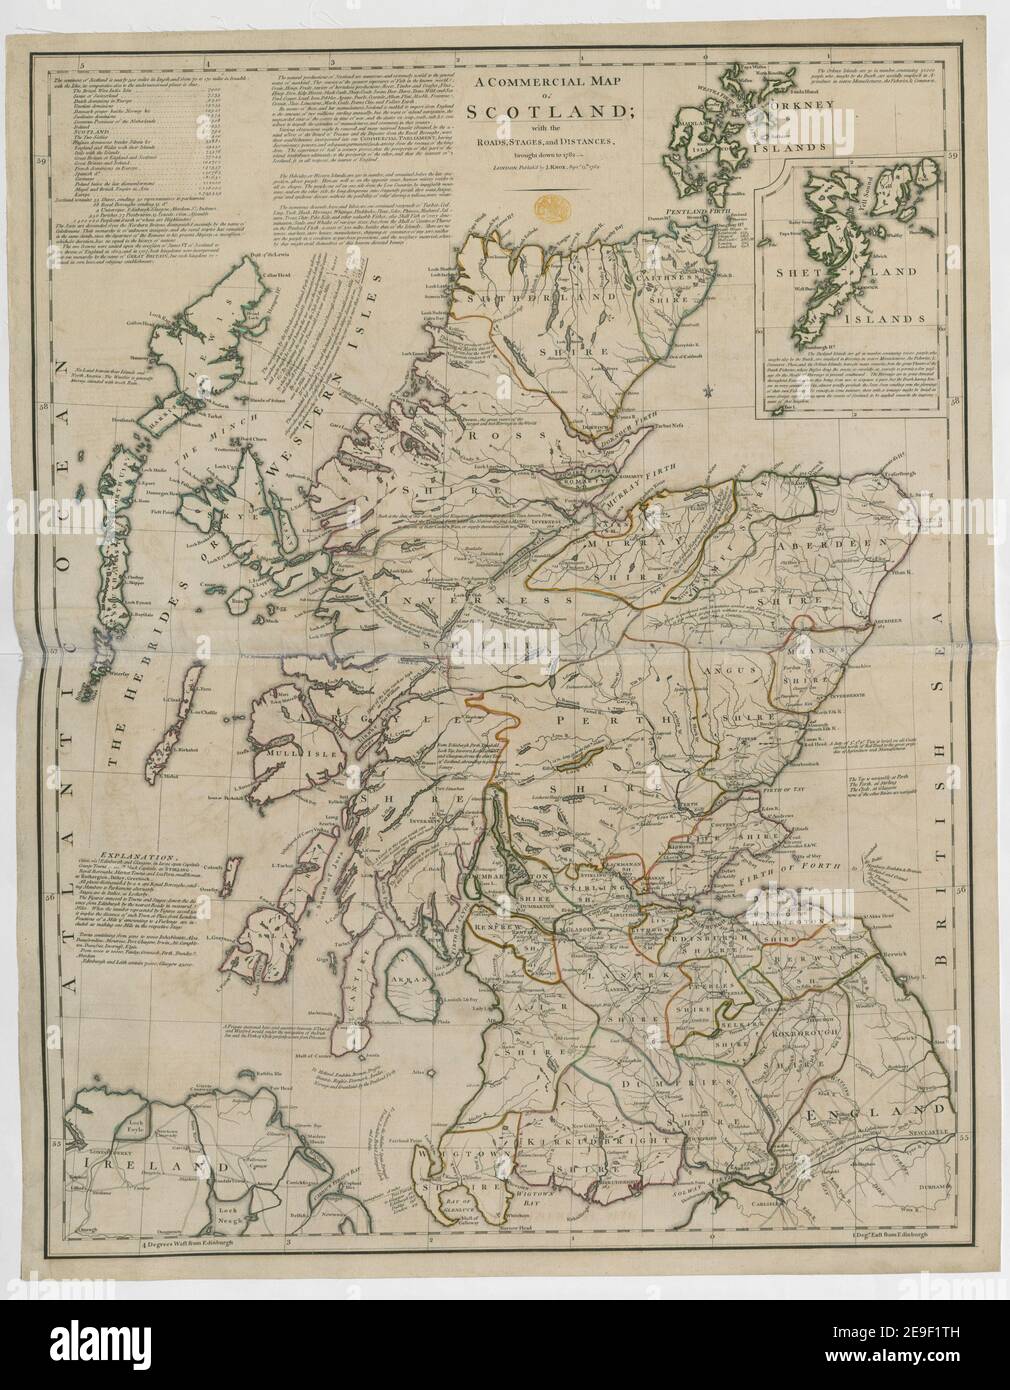 A COMMERCIAL MAP of SCOTLAND  Author  Knox, John 48.29. Place of publication: London Publisher: Publish'd by J. Knox. Sept.r 13.th, Date of publication: 1782.  Item type: 1 map Medium: copperplate engraving, hand colour Dimensions: 70 x 53 cm  Former owner: George III, King of Great Britain, 1738-1820 Stock Photo